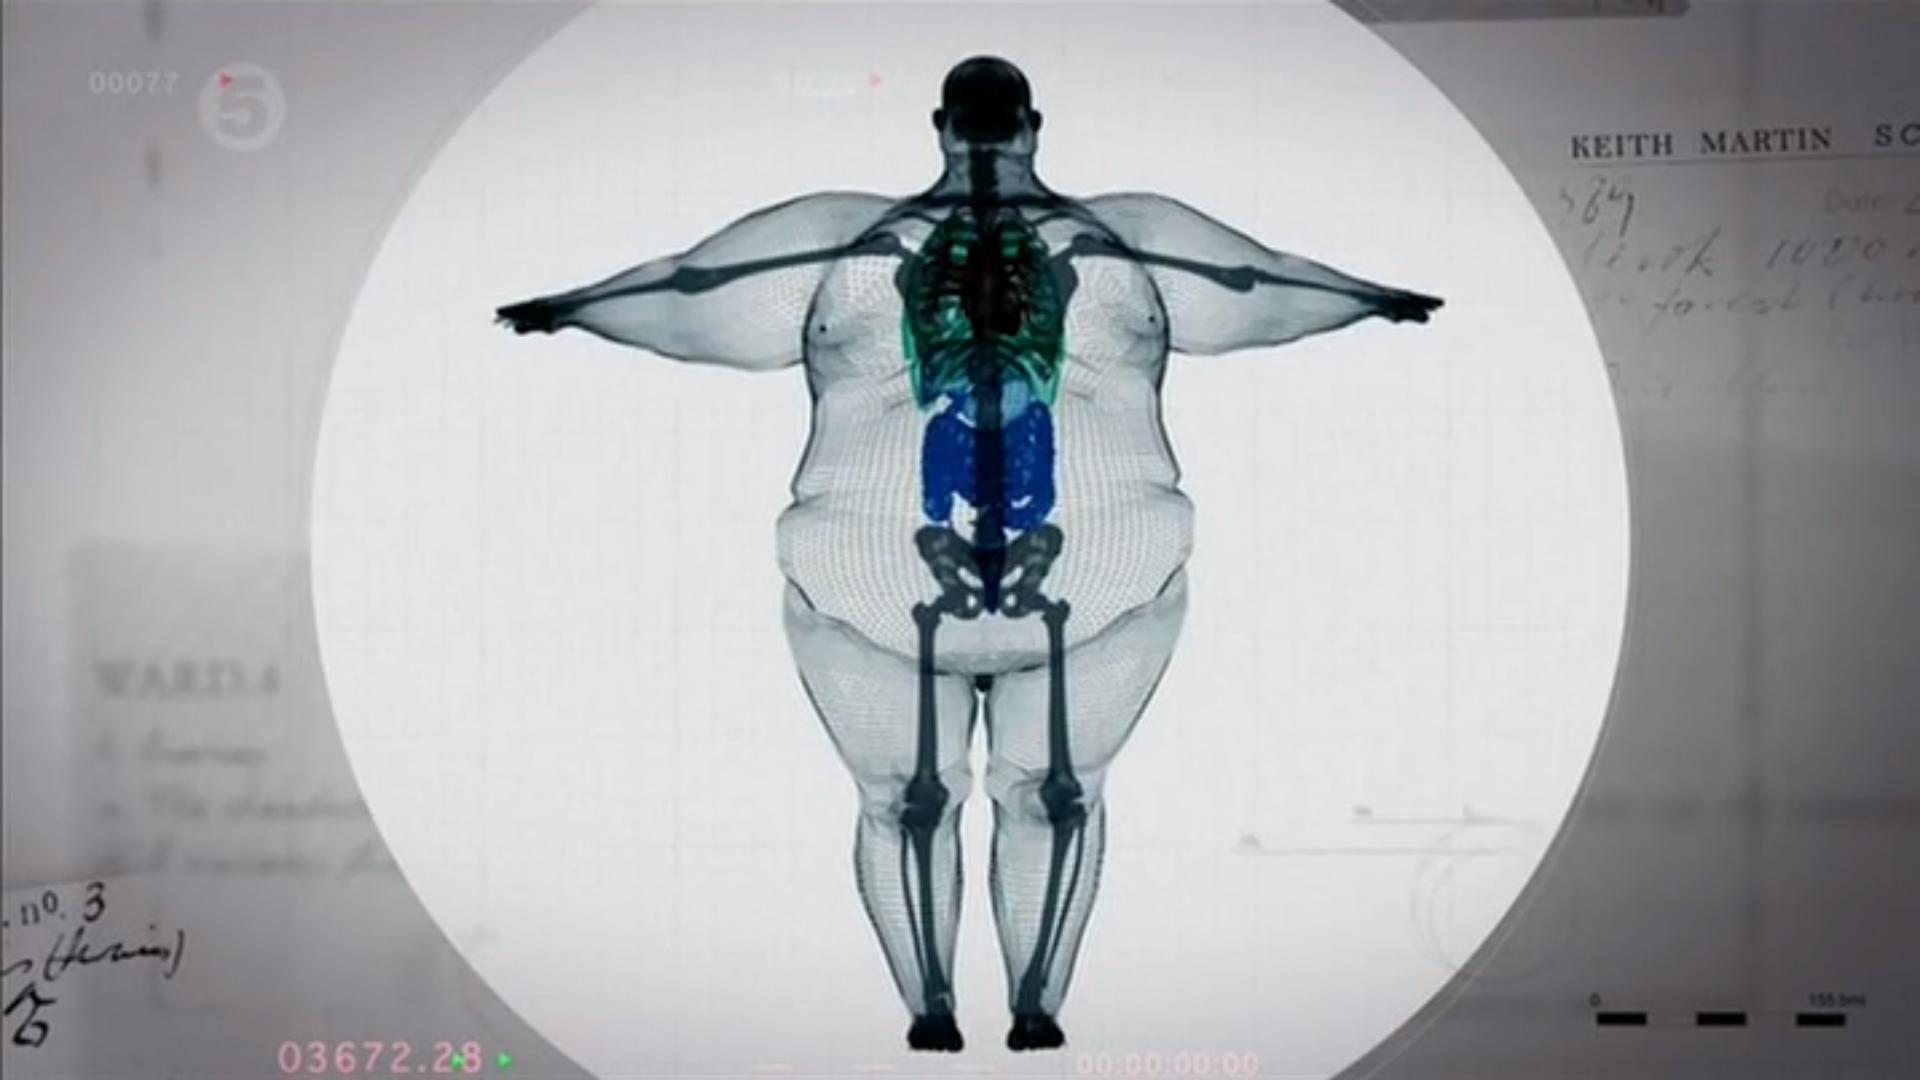 this X Ray shows Keith Martin who weights 900 lbs. You can see that his small skeleton has to support this enormous weight.